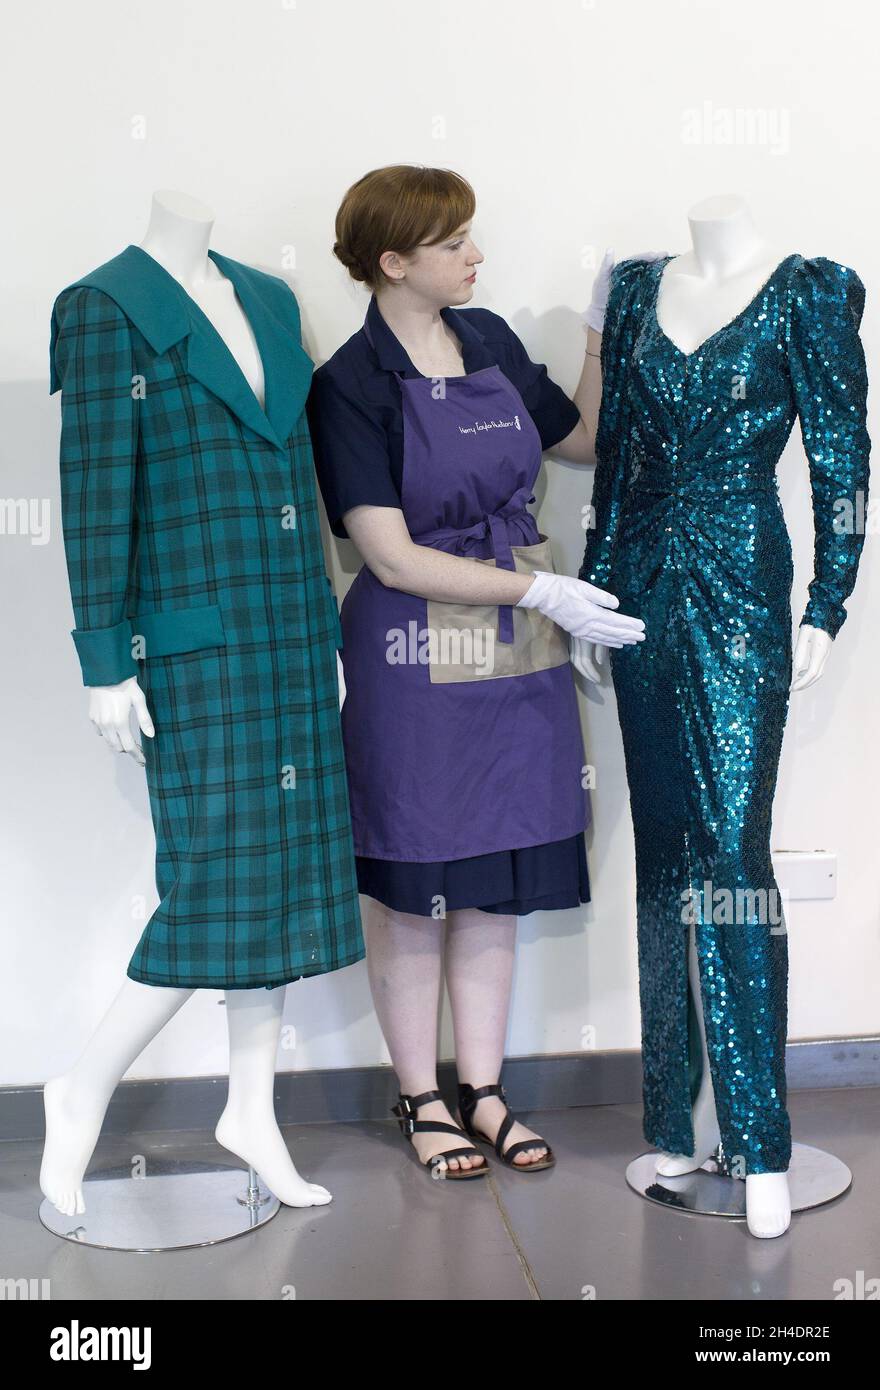 Auction assistant Lucy Bishop puts the finishing touches to two dresses worn by Princess Diana, both in shades of teal-blue/green, part of the June 14th  Passion for fashion auction at Kerry Taylor Auctions in south London.  (Left) Lot 208, a practical large tartan check with wide padded shoulders with Diana's trademark sailor-collar, designed by Elizabeth and David Emanuel, estimate £10,000-15,000.  (Right) Lot 210, a glamorous gown split to the knee by designer Catherine Walker, estimate £80,000-100,000. Stock Photo